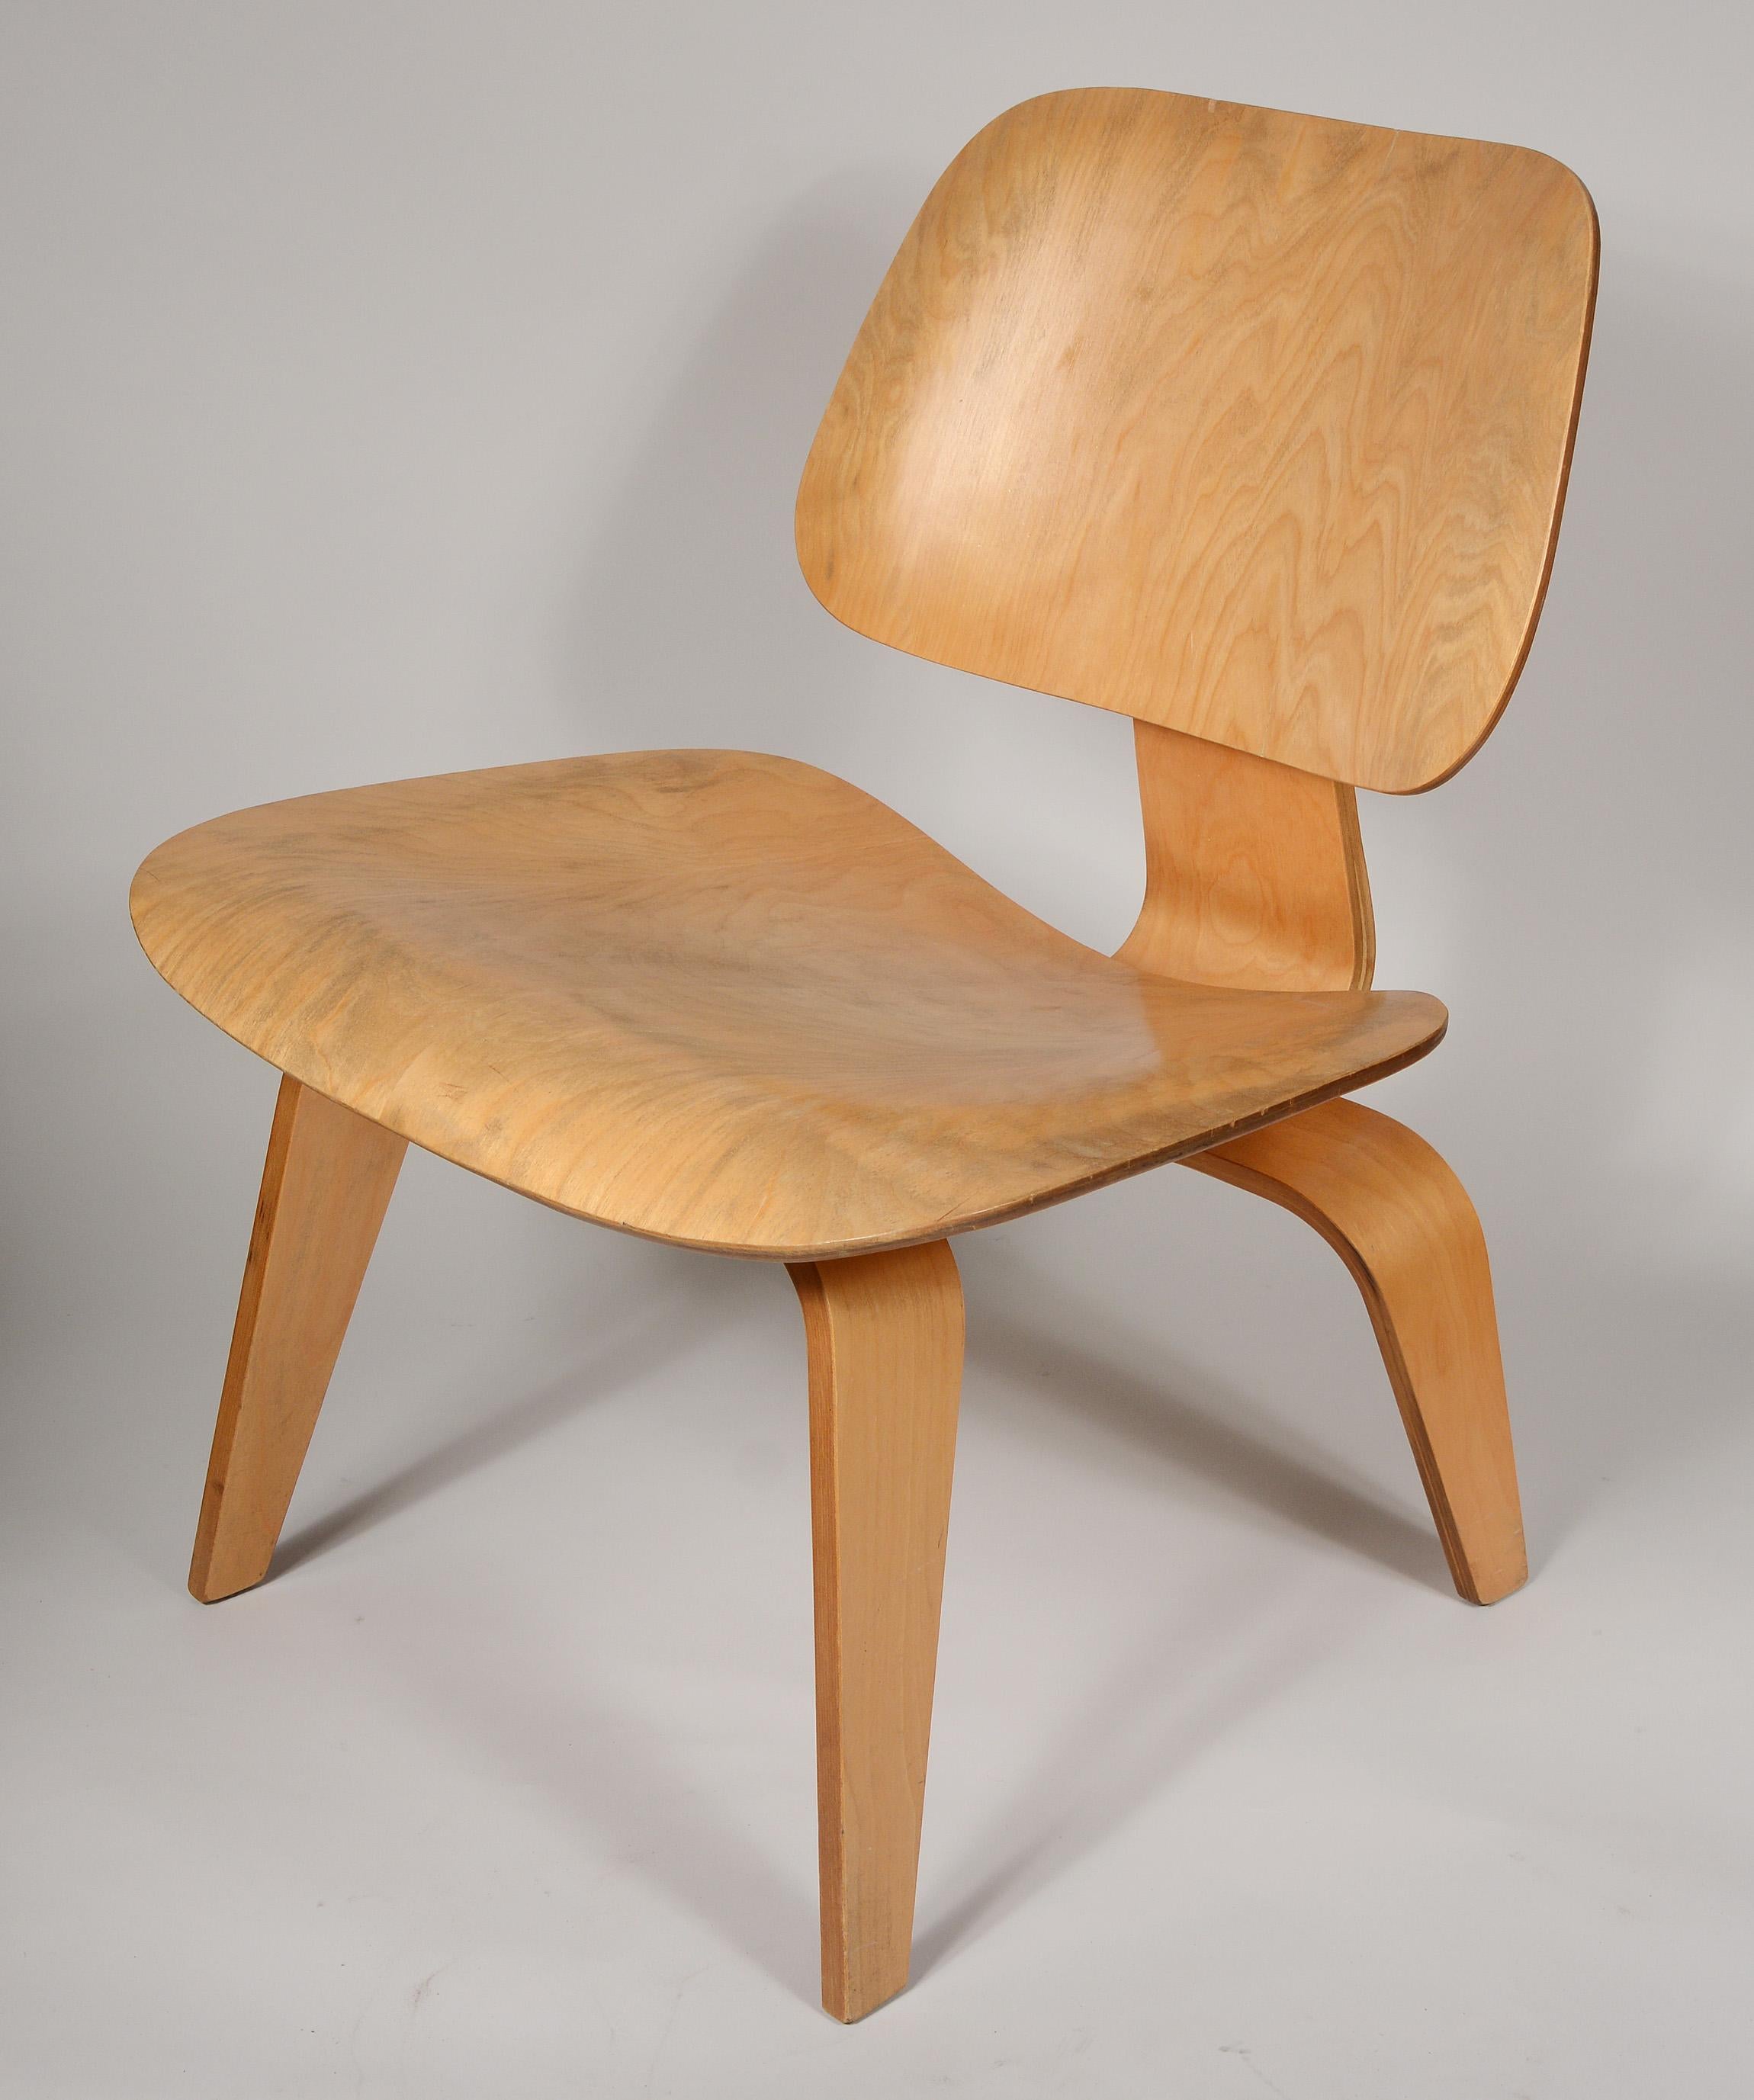 Earlier LCW by Ray and Charles Eames. This one is in birch. The chair is in excellent original condition. There is one small veneer chip at the top of the back. Some of the grain has darkened. The back shock mount looks to have been re-glued in the